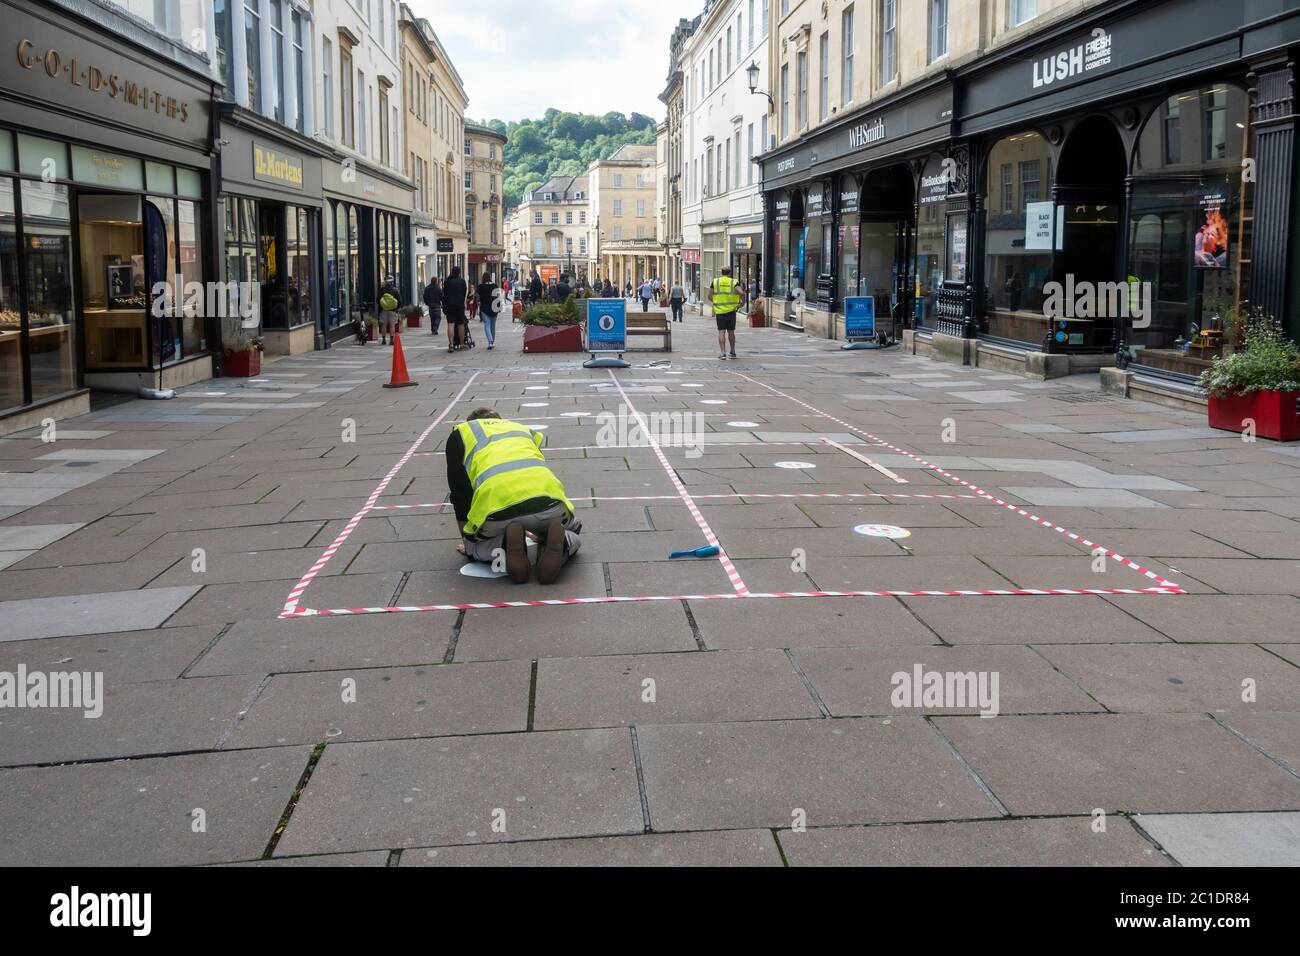 Non essential shops reopen in Bath after 12 weeks of being shut with social distancing measures in place. Covid 19 Bath, England, UK Stock Photo